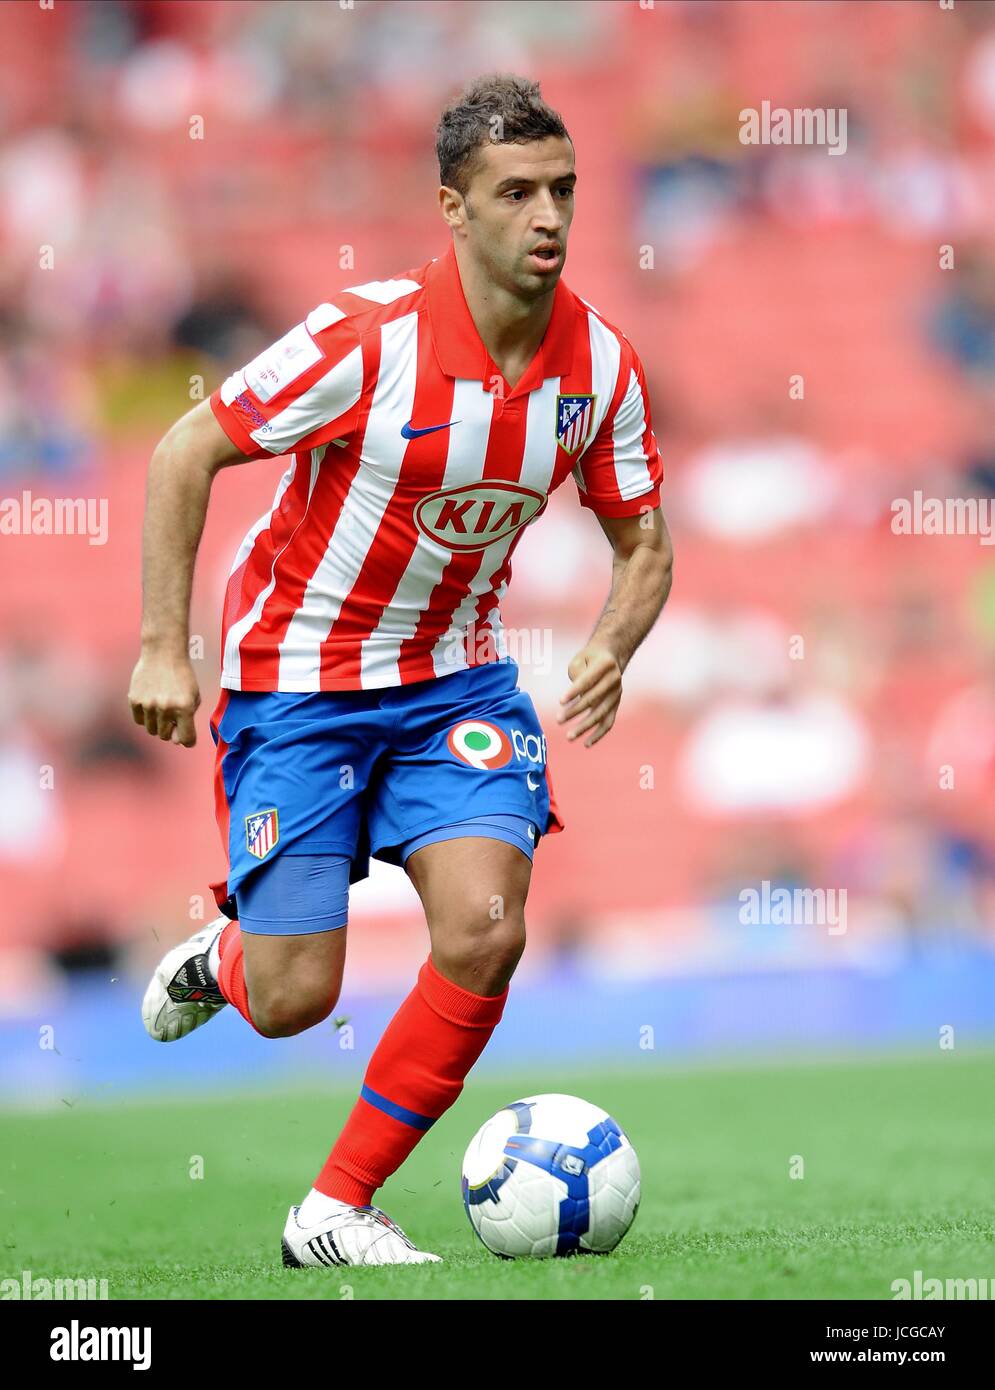 SIMAO SABROSA ATLETICO MADRID V PARIS SAINT-GERMAIN ATLETICO MADRID V PARIS SAINT GERMAIN EMIRATES STADIUM, LONDON, ENGLAND 02 August 2009 DIY97829   MIRATES CUP 2009, EMIRATES STADIUM, LONDON     WARNING! This Photograph May Only Be Used For Newspaper And/Or Magazine Editorial Purposes. May Not Be Used For Publications Involving 1 player, 1 Club Or 1 Competition  Without Written Authorisation From Football DataCo Ltd. For Any Queries, Please Contact Football DataCo Ltd on +44 (0) 207 864 9121 Stock Photo